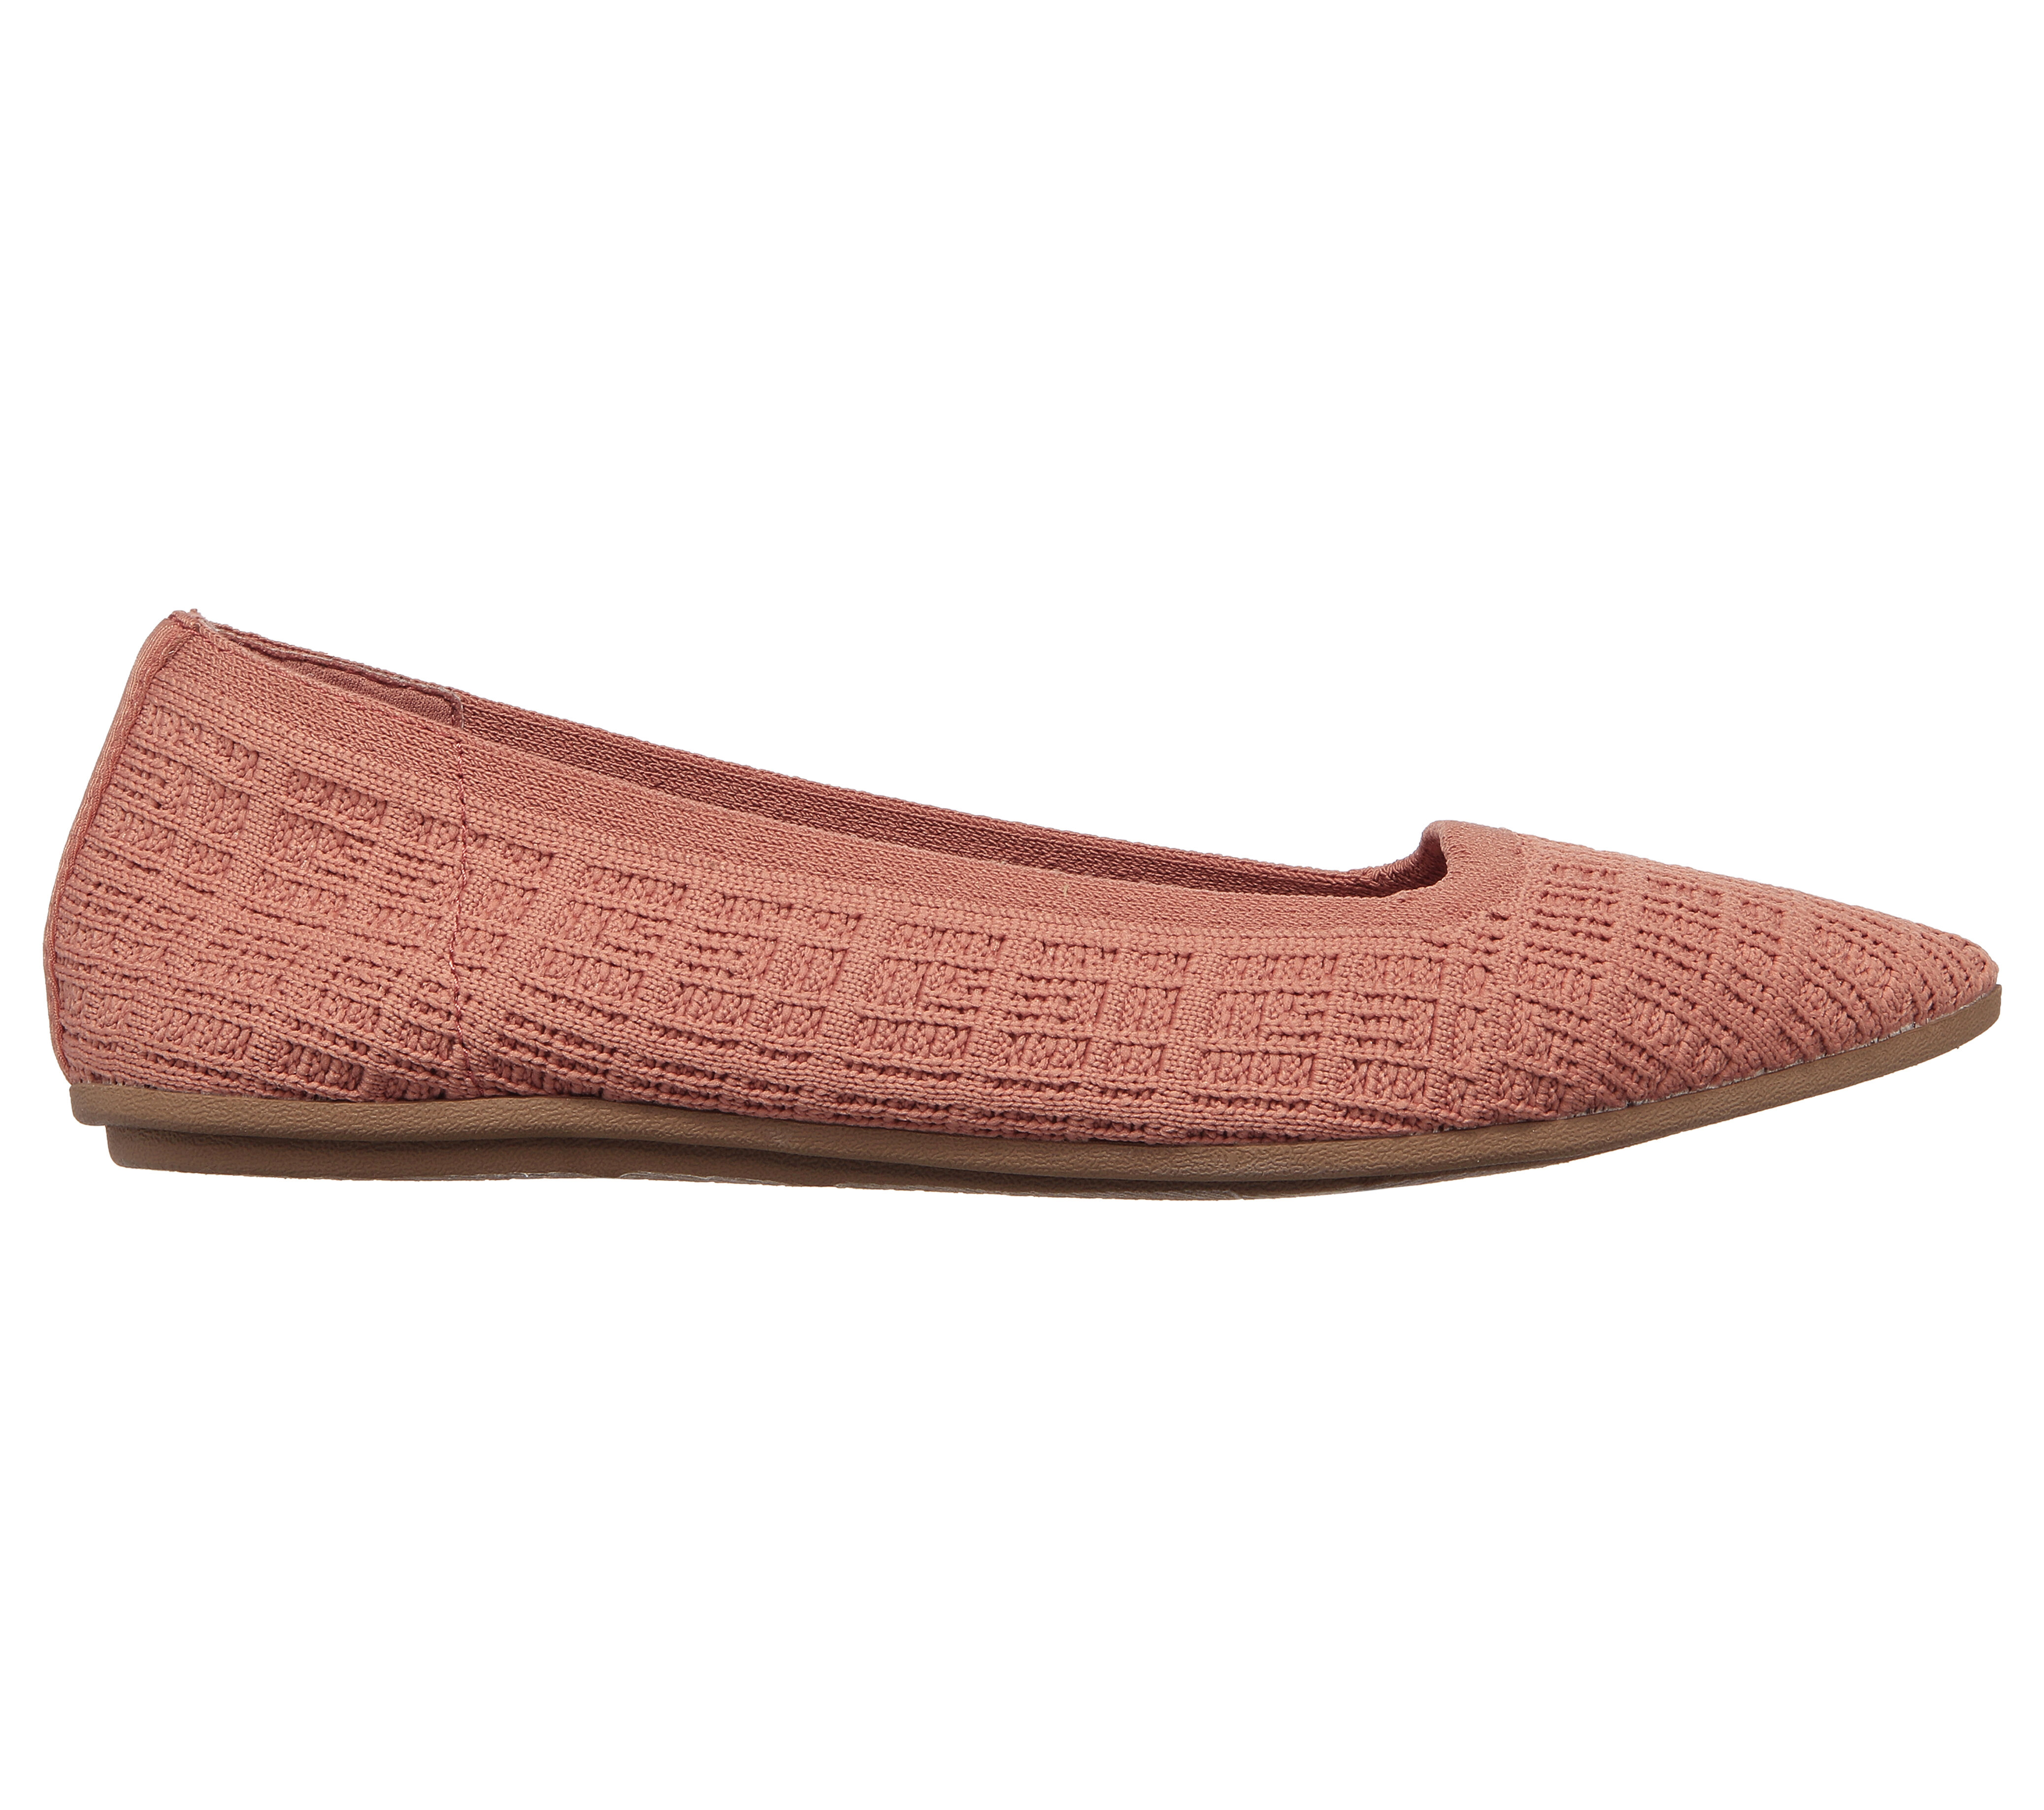 skechers flats with strap